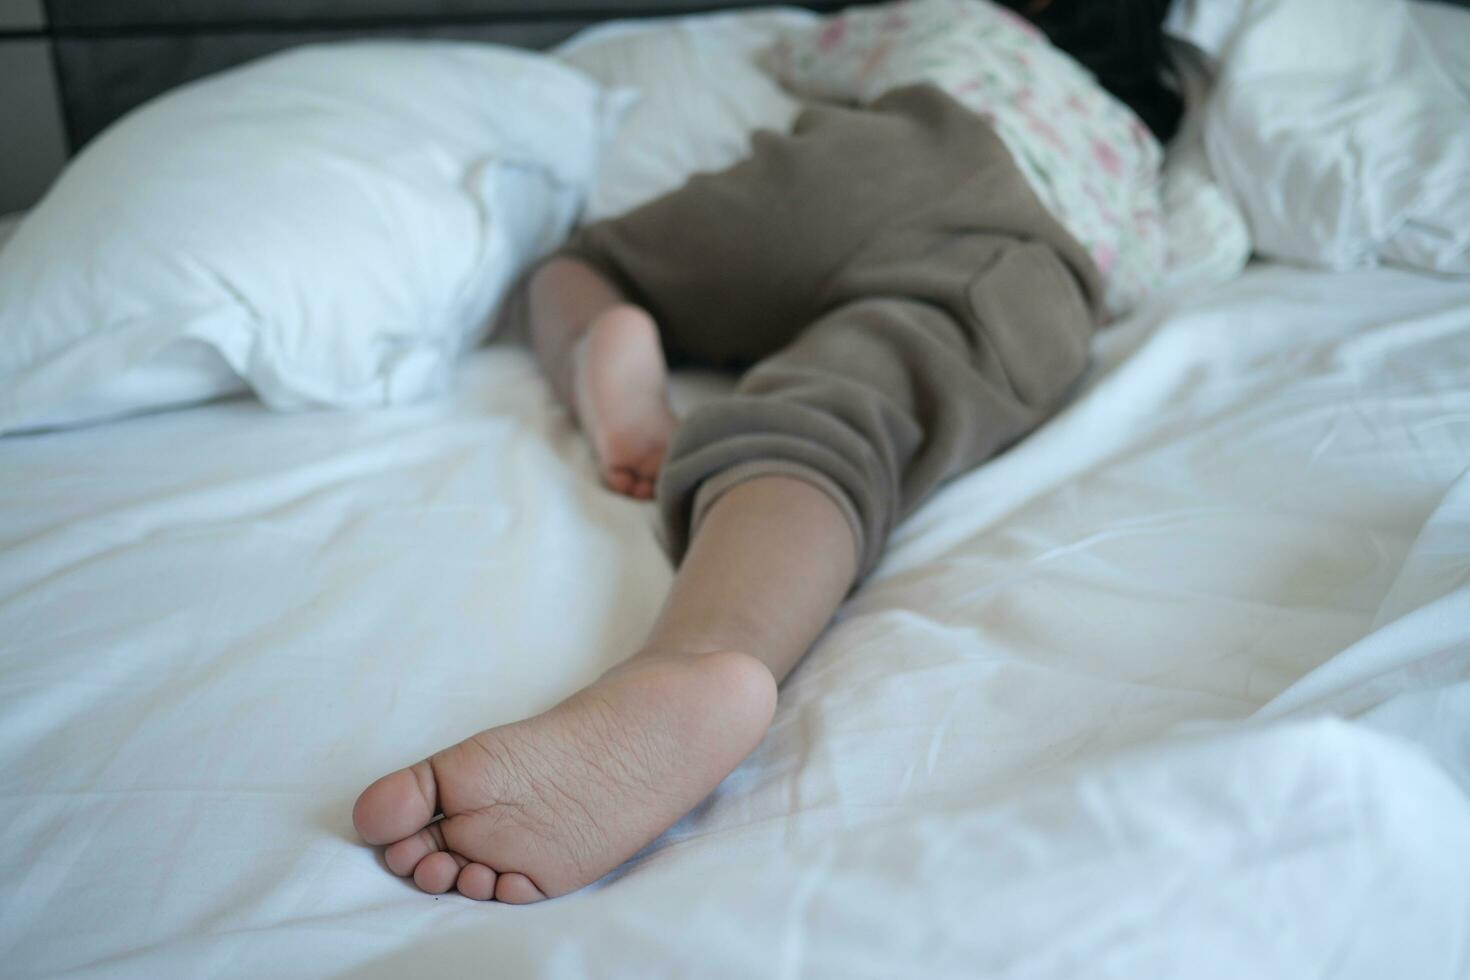 a child sleeping on bed barefoot photo